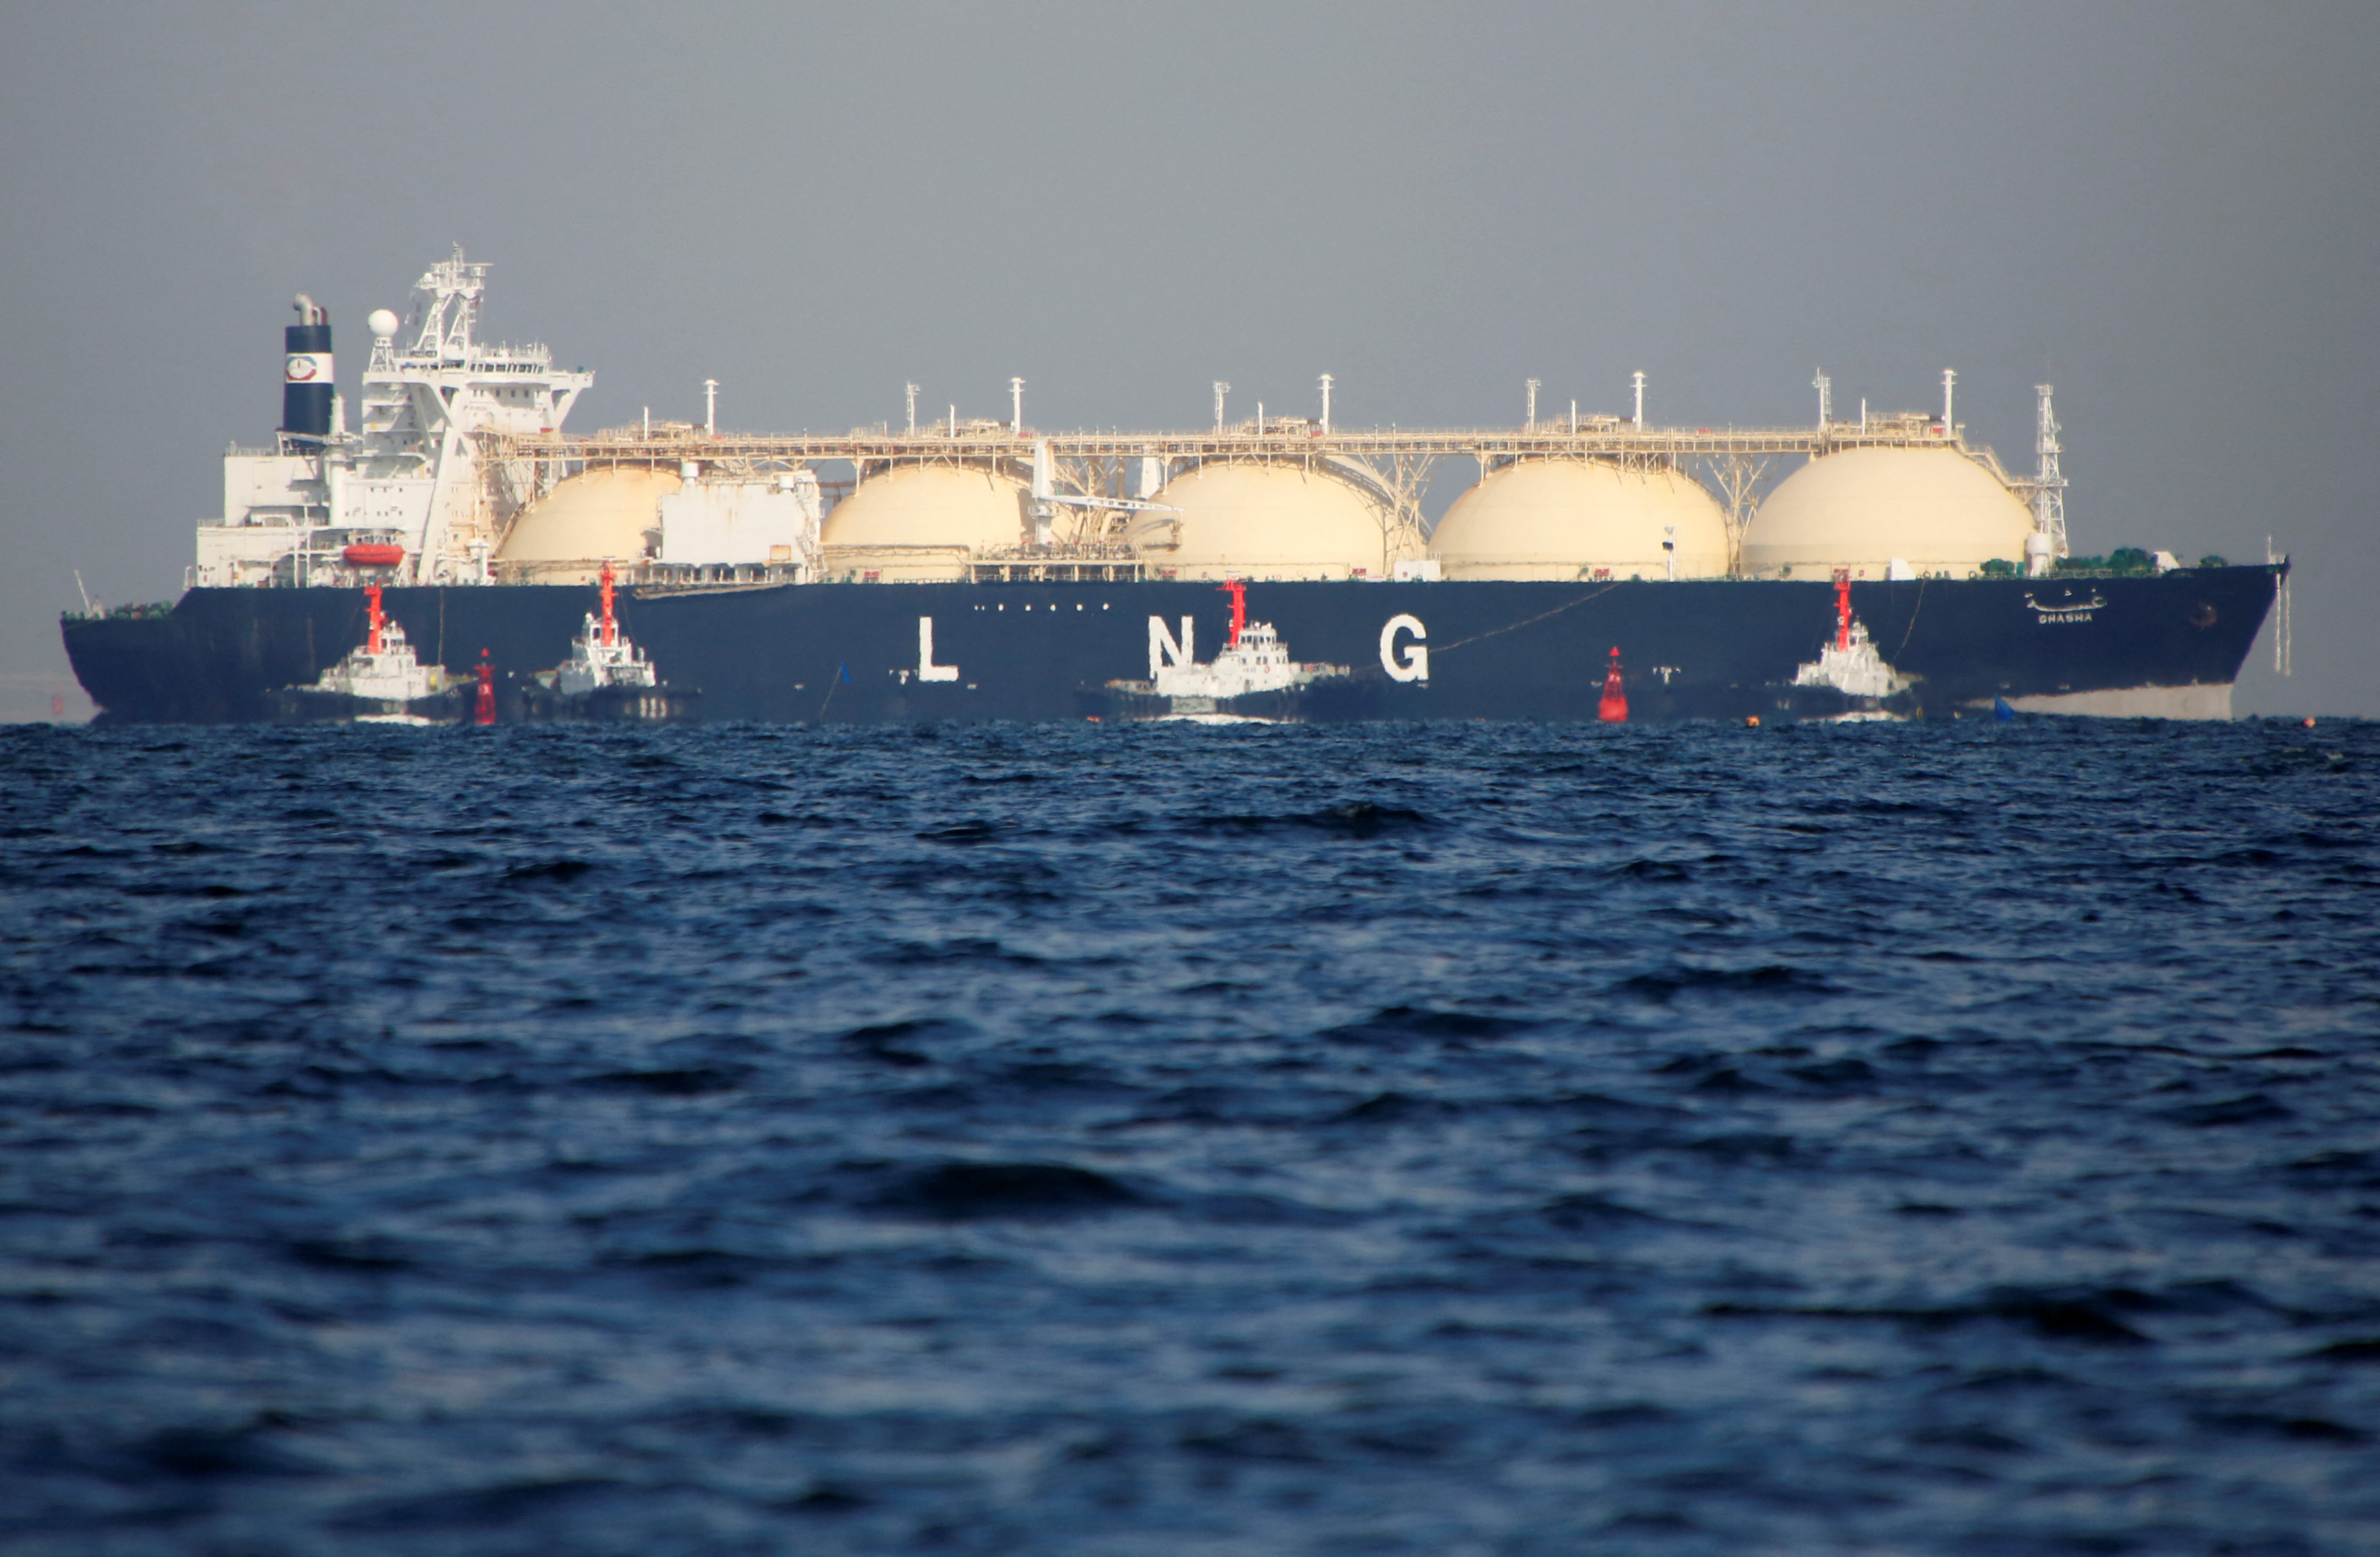 A LNG tanker is tugged towards a thermal power station in Futtsu